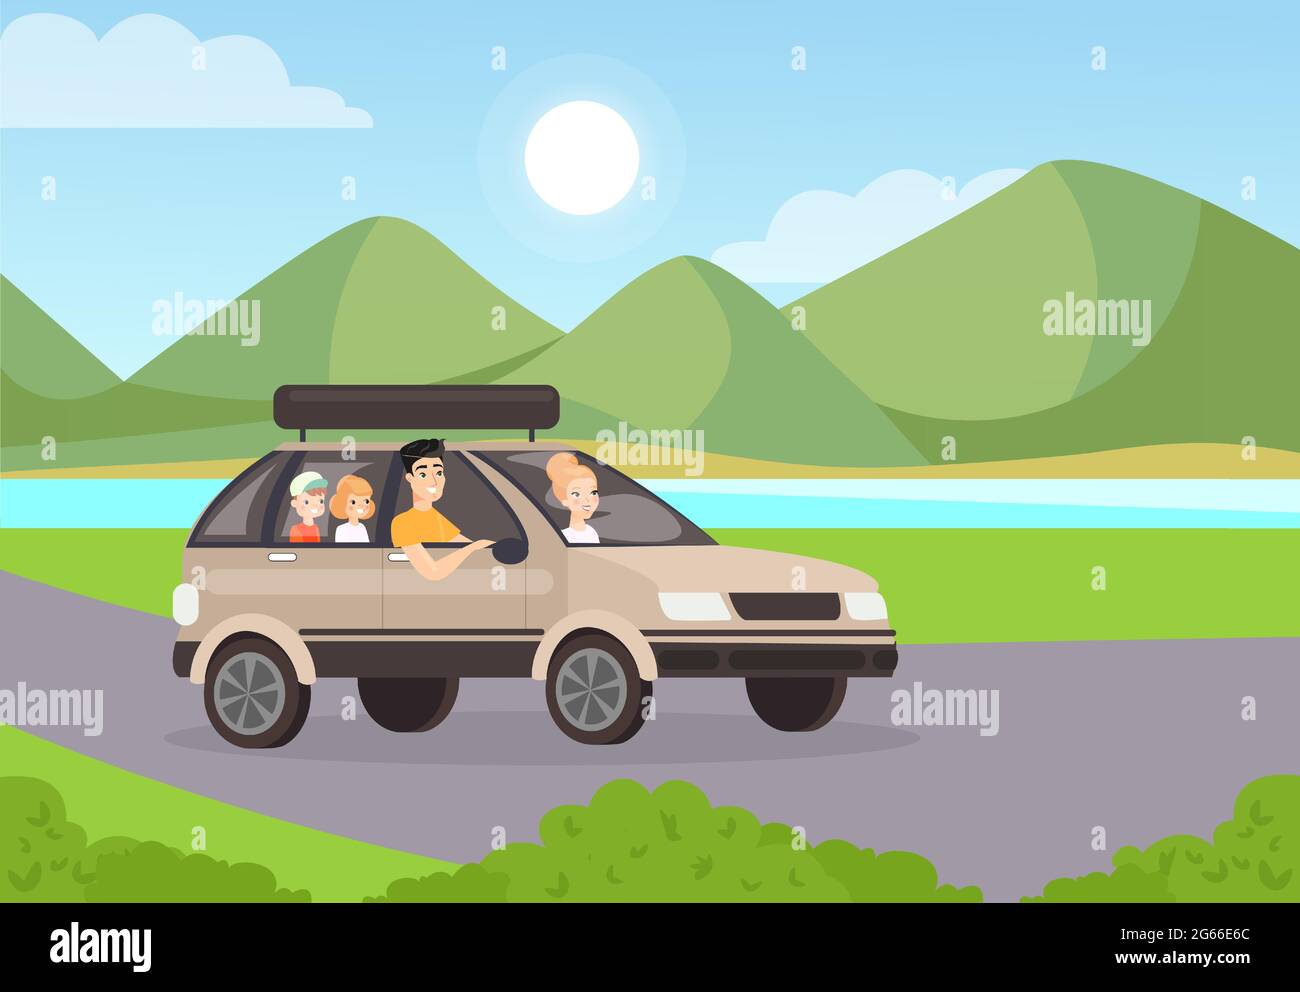 Family road trip flat vector illustration. Mother riding car with husband and children. People characters travelling together in automobile. Beautiful Stock Vector